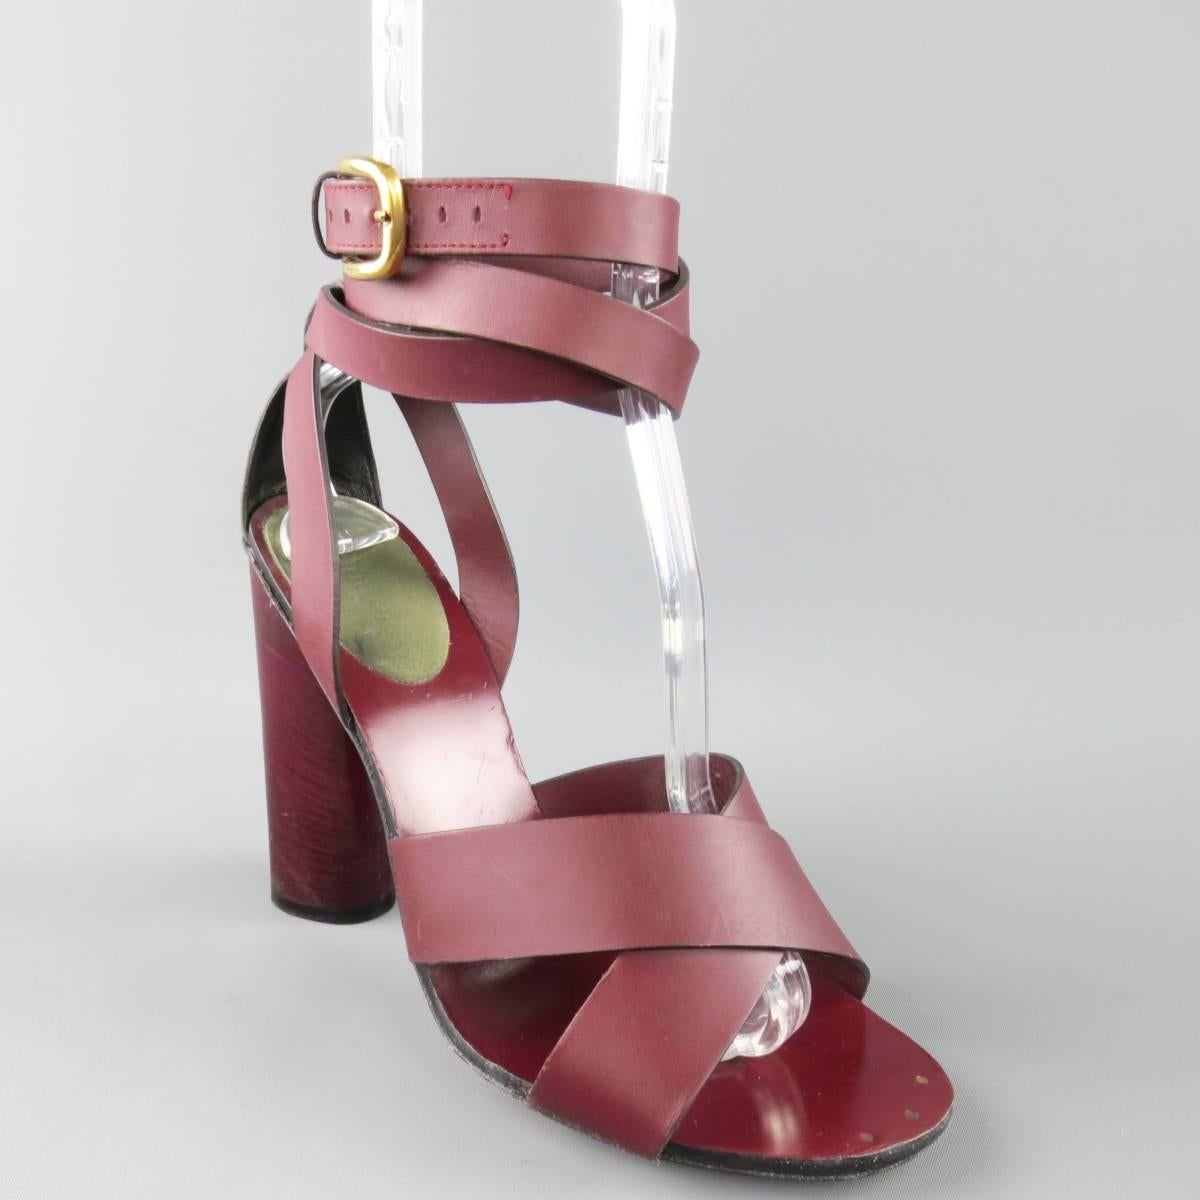 These fabulous retro inspired GUCCI sandals come in burgundy red leather and feature a thick X strap, olive suede heel, wrapped ankle strap with gold tone buckle, and chunky stacked heel. Wear throughout. As-Is. Made in Italy.
 
Fair Pre-Owned